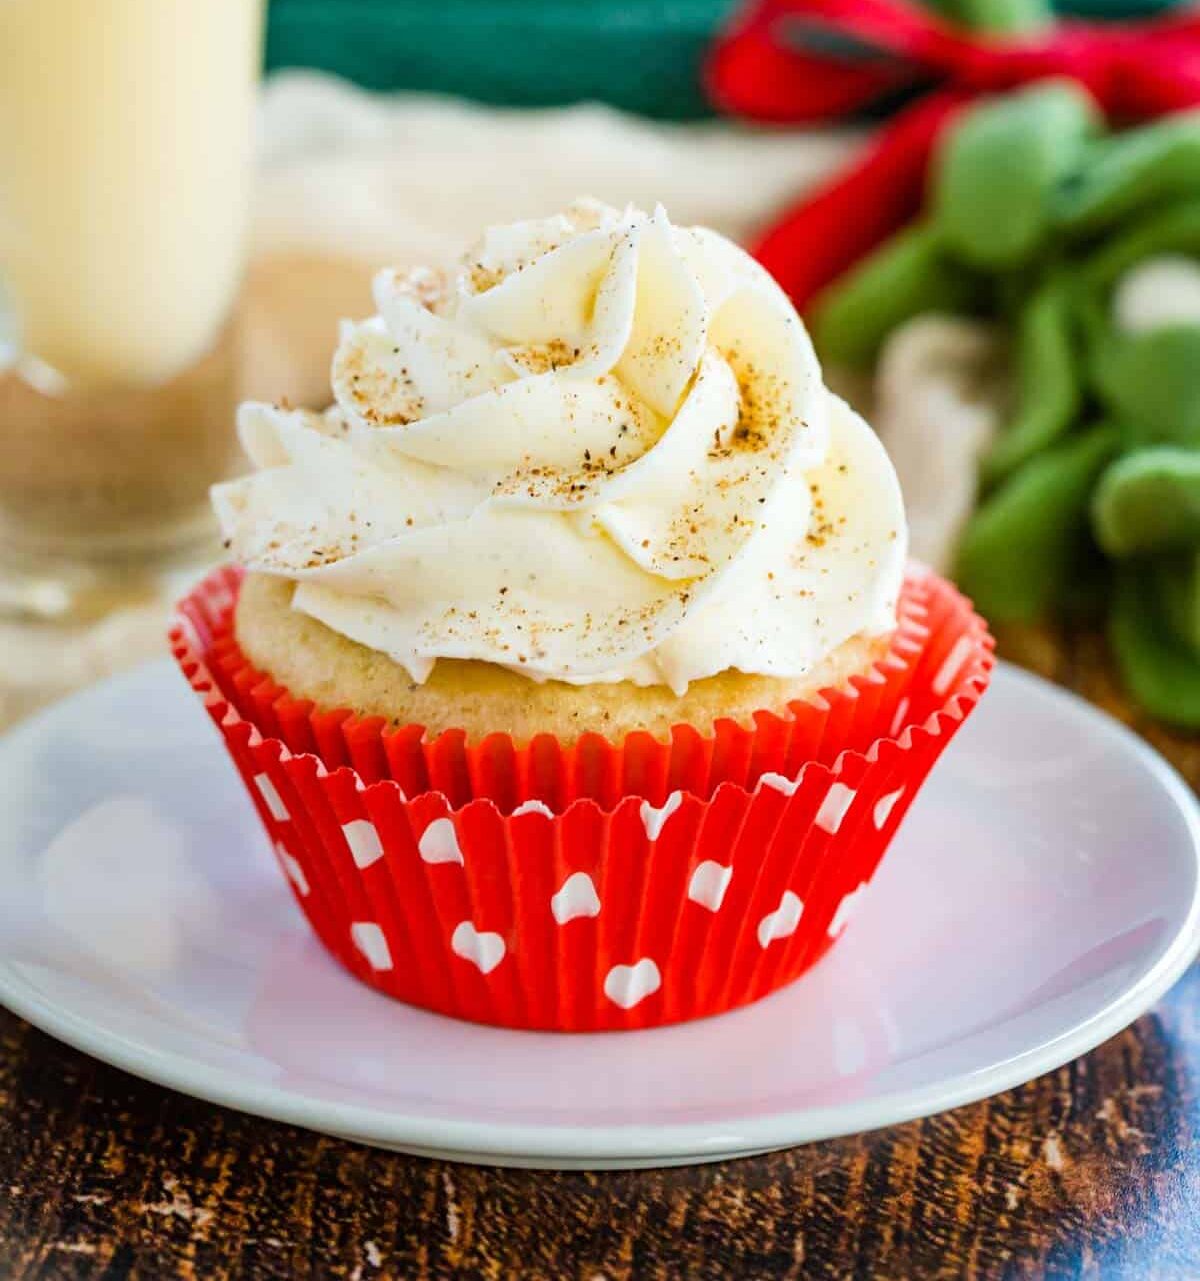 a cupcake with eggnog, picture looks very Christmasy